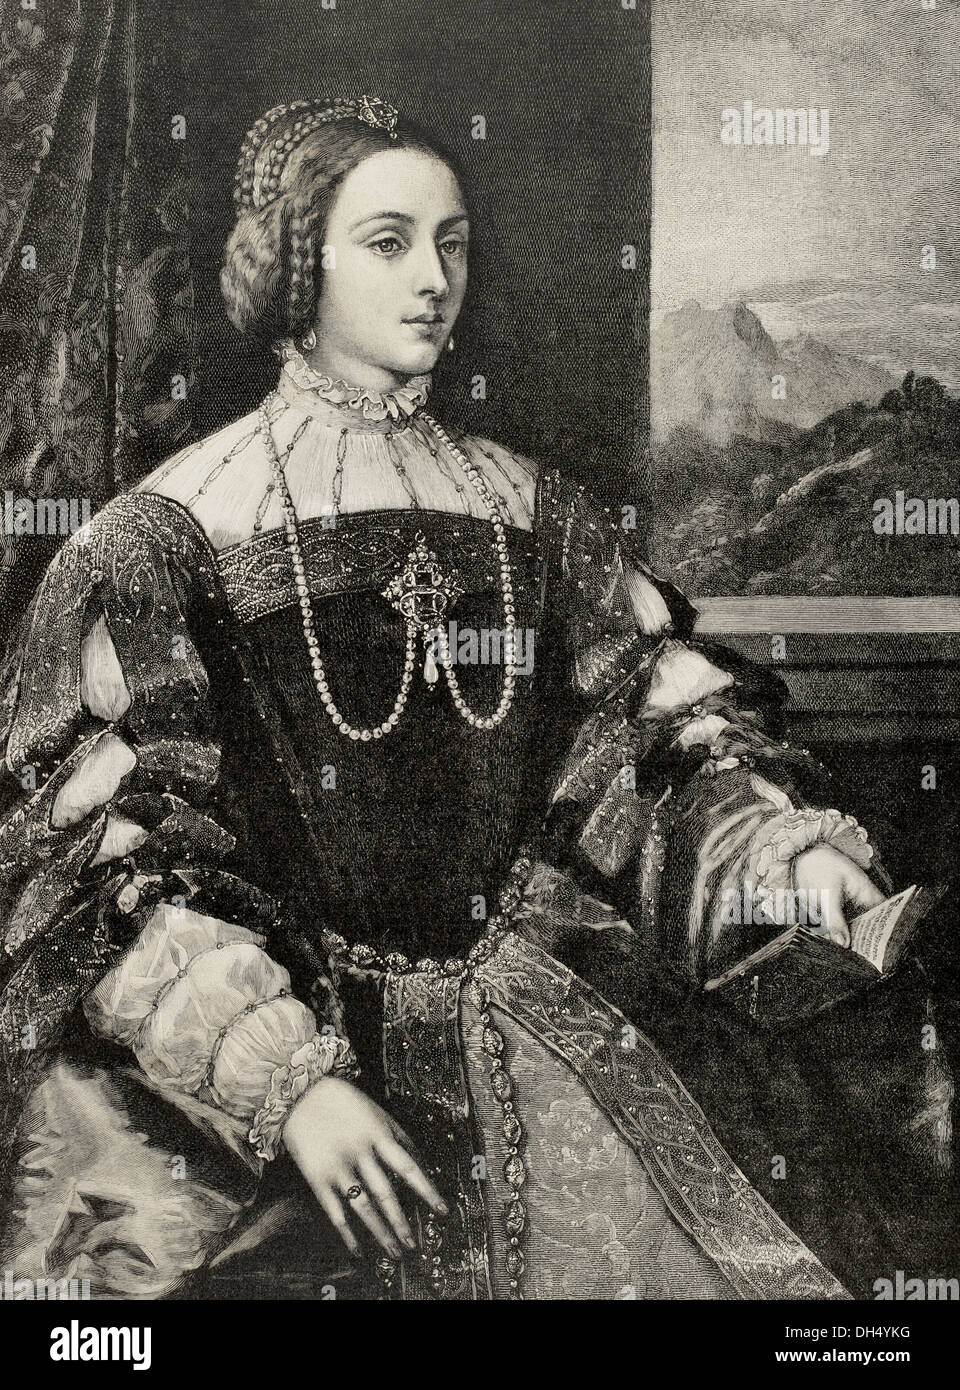 Isabella of Portugal (1503-1539). Queen of Spain and Empress of Germany. Engraving after a painting of Titian. Stock Photo